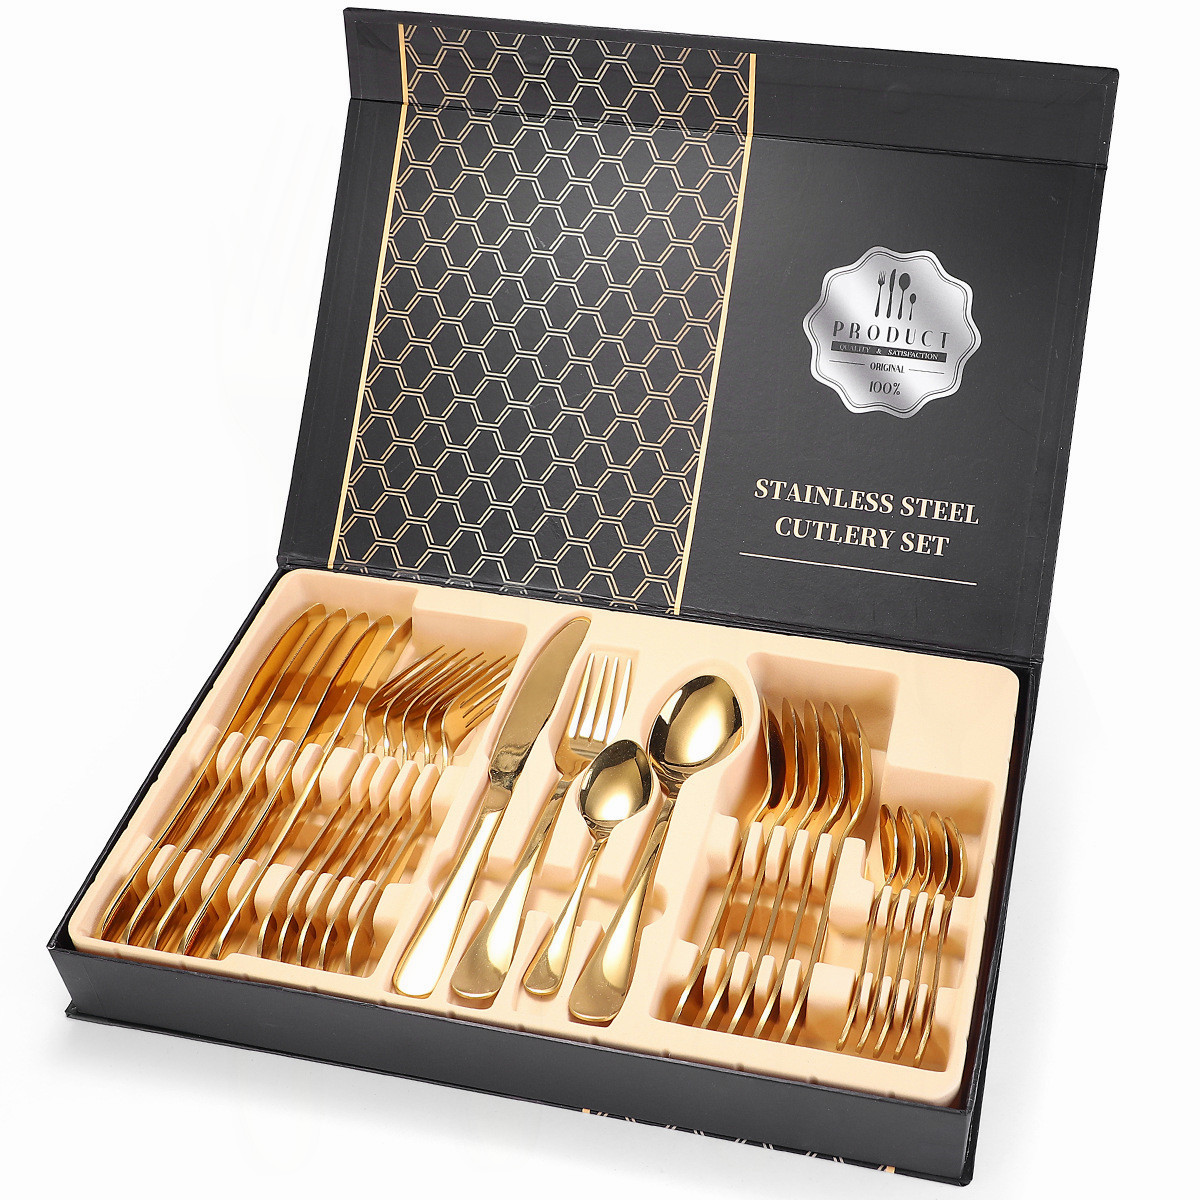 Tableware Gold Stainless Steel Cutlery Complete Fork Spoons Knives Set with Case for Kitchen Dinnerware Sets of Cutlery 24 Pcs